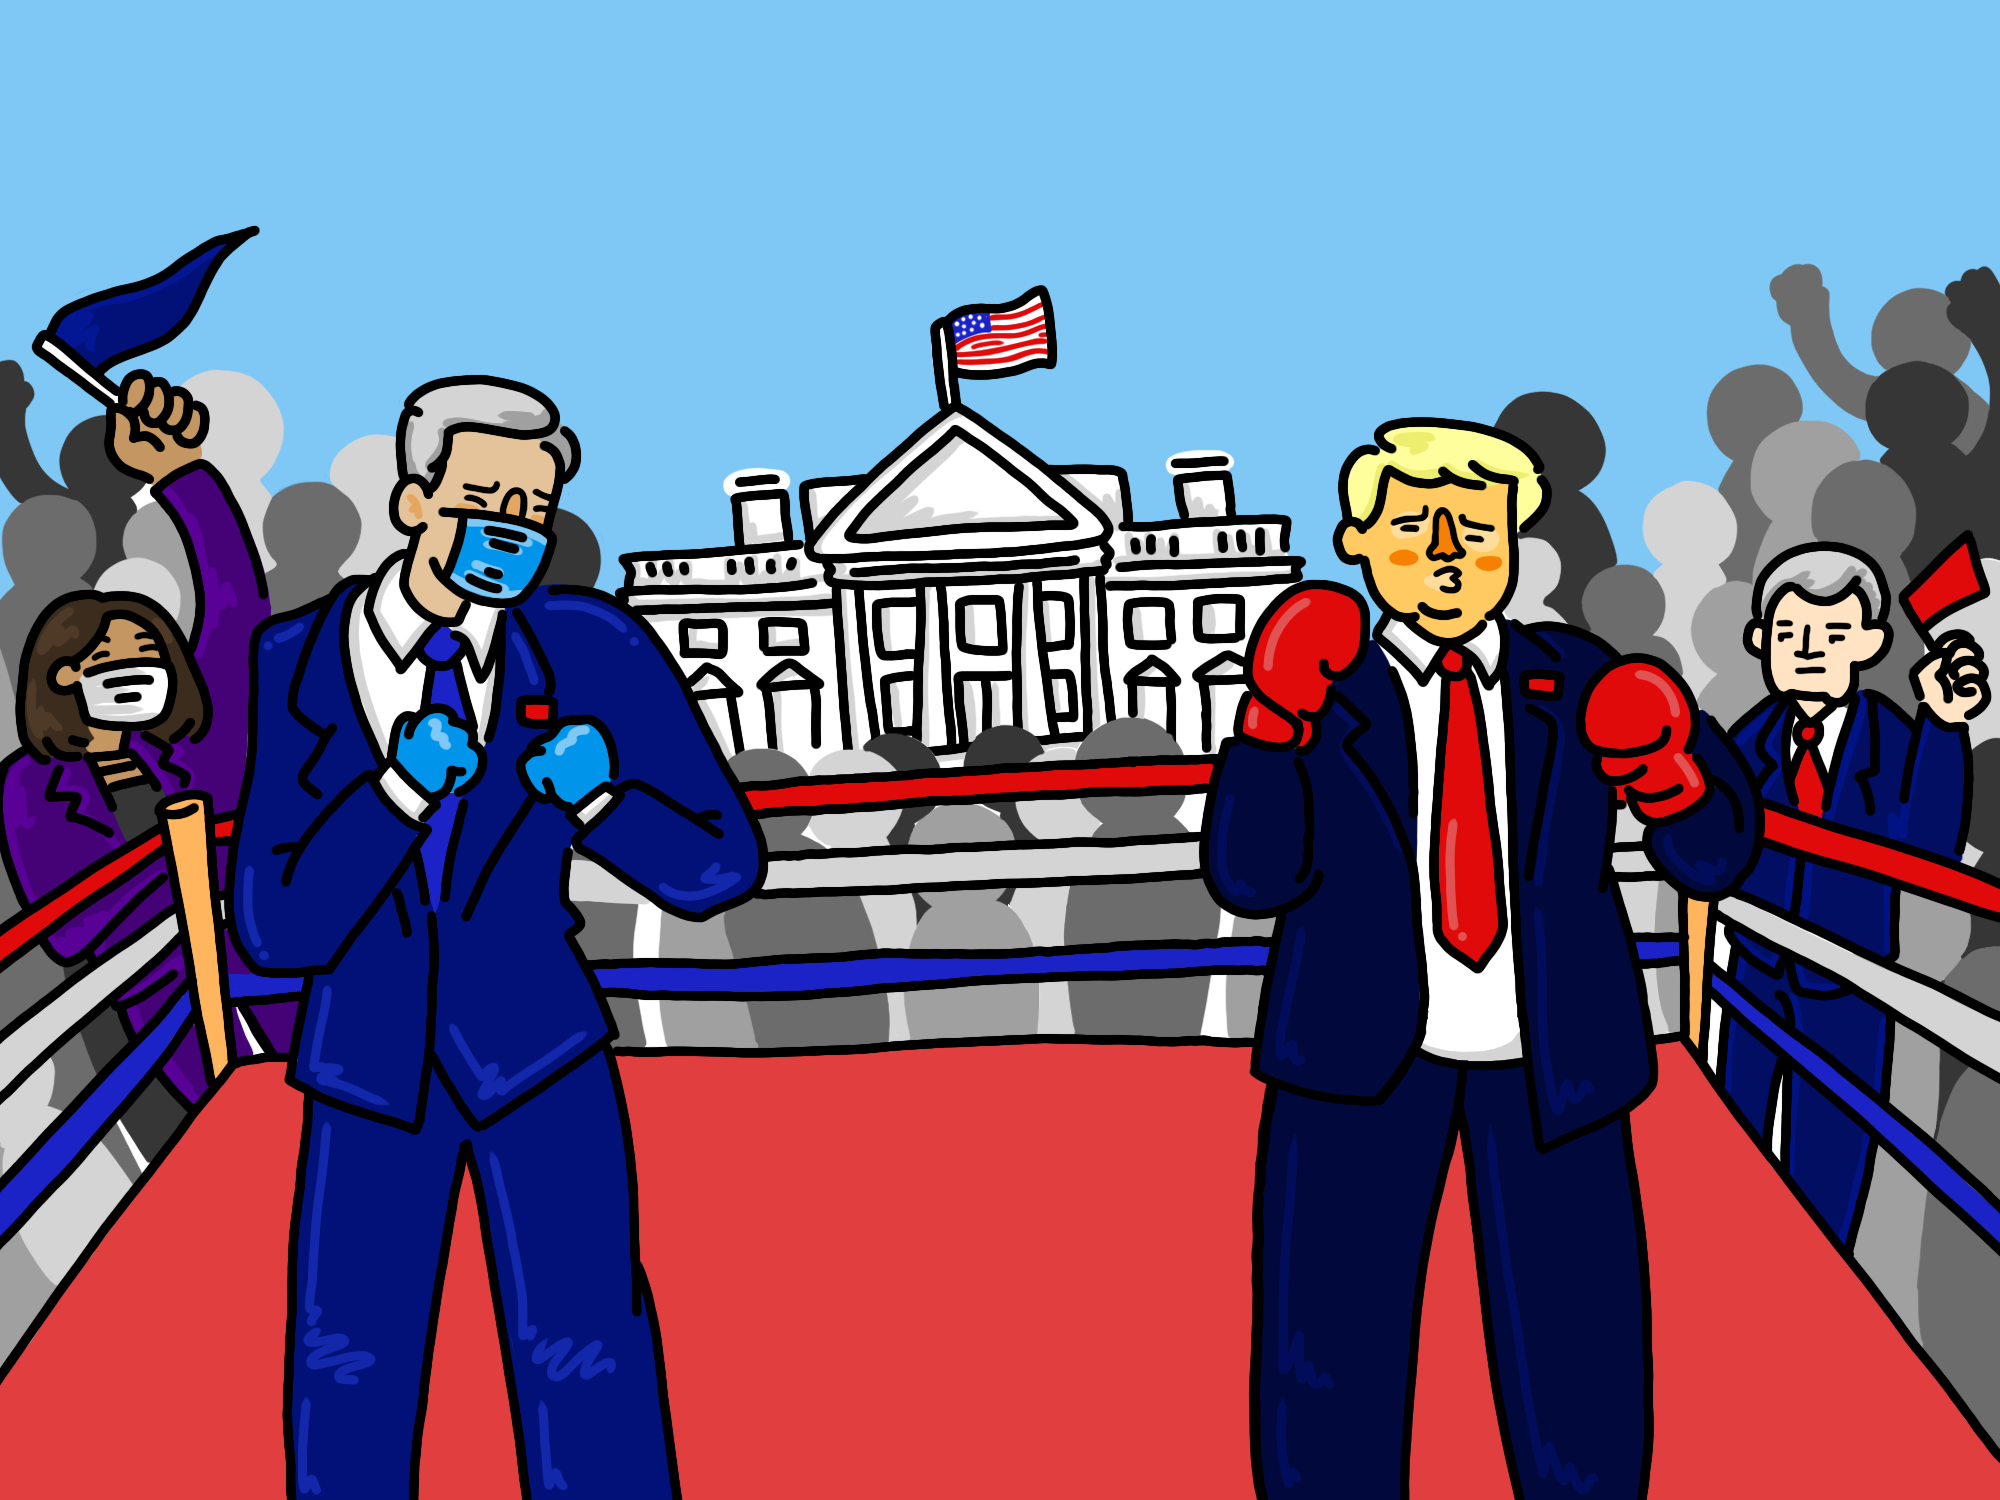 Joe Biden, wearing a mask and surgical gloves, faces Donald Trump in a boxing ring in front of the White House; Kamala Harris and Mike Pence stand cheering on the sidelines.